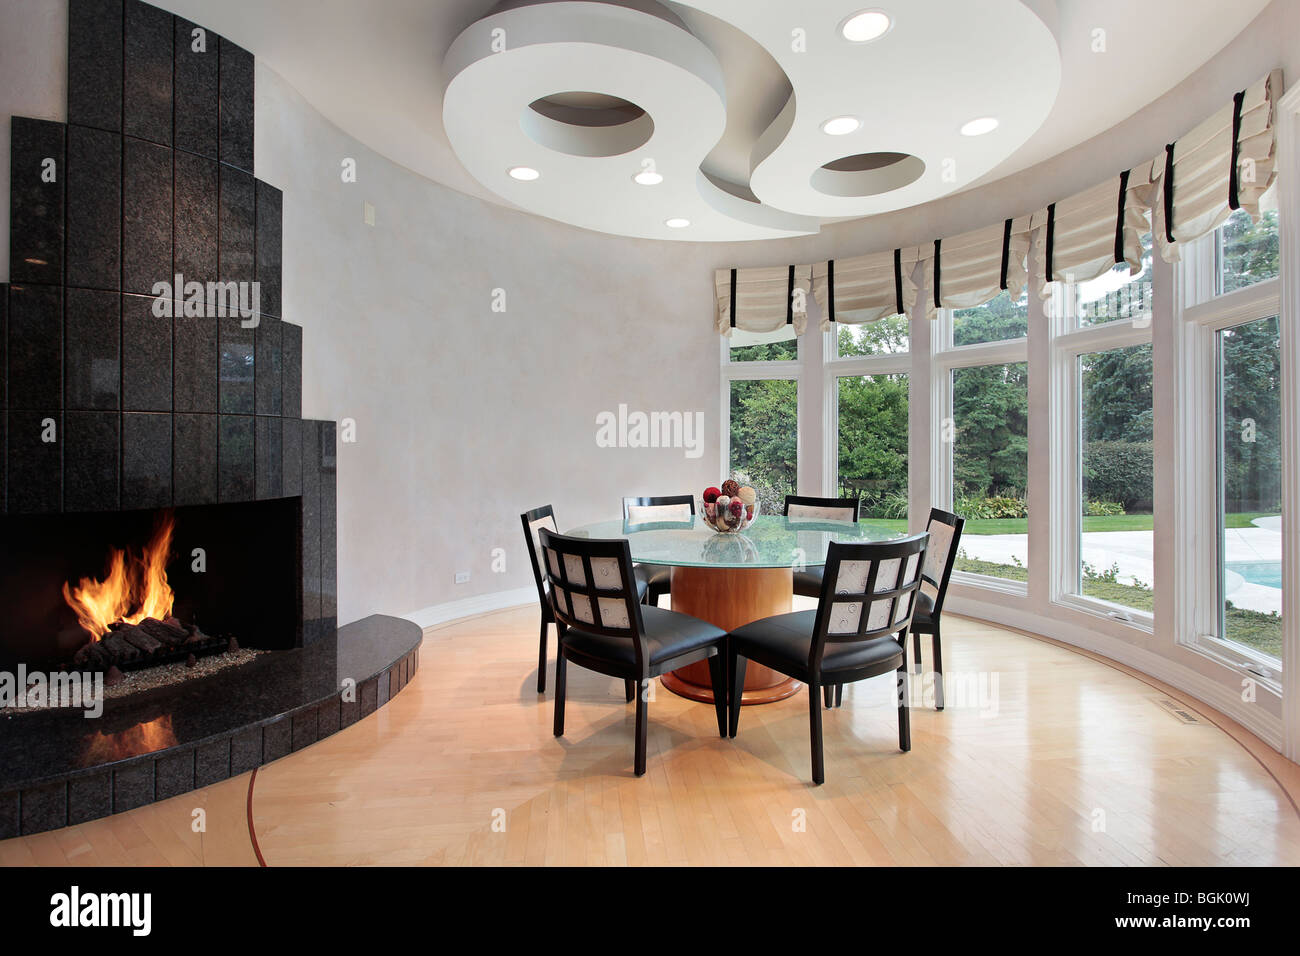 Eating area of luxury home with fireplace Stock Photo